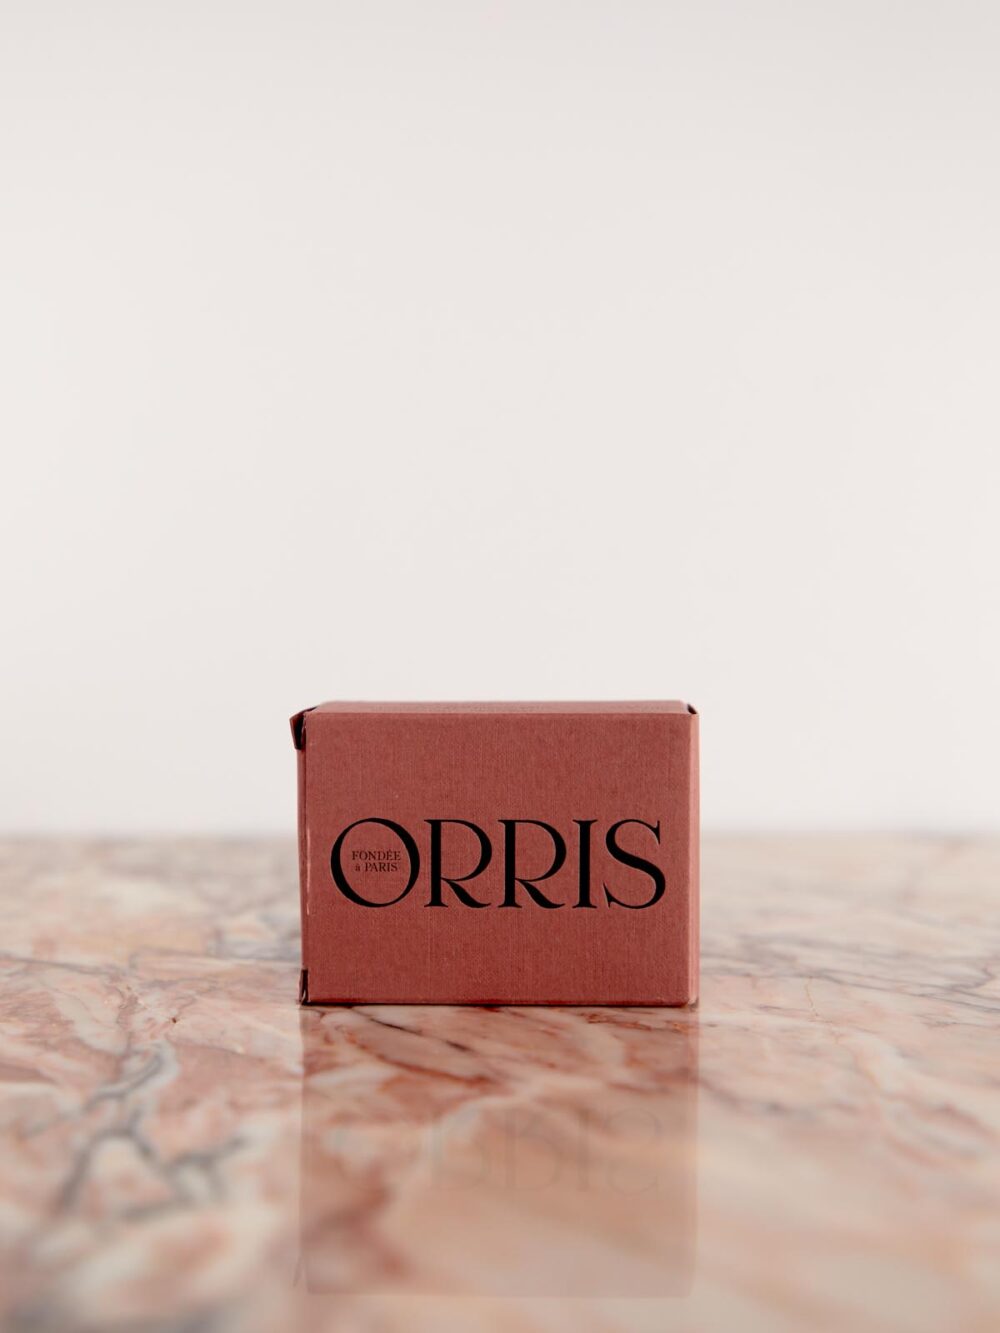 Le Nomade - Cleansing Bar by Orris box on pink marble